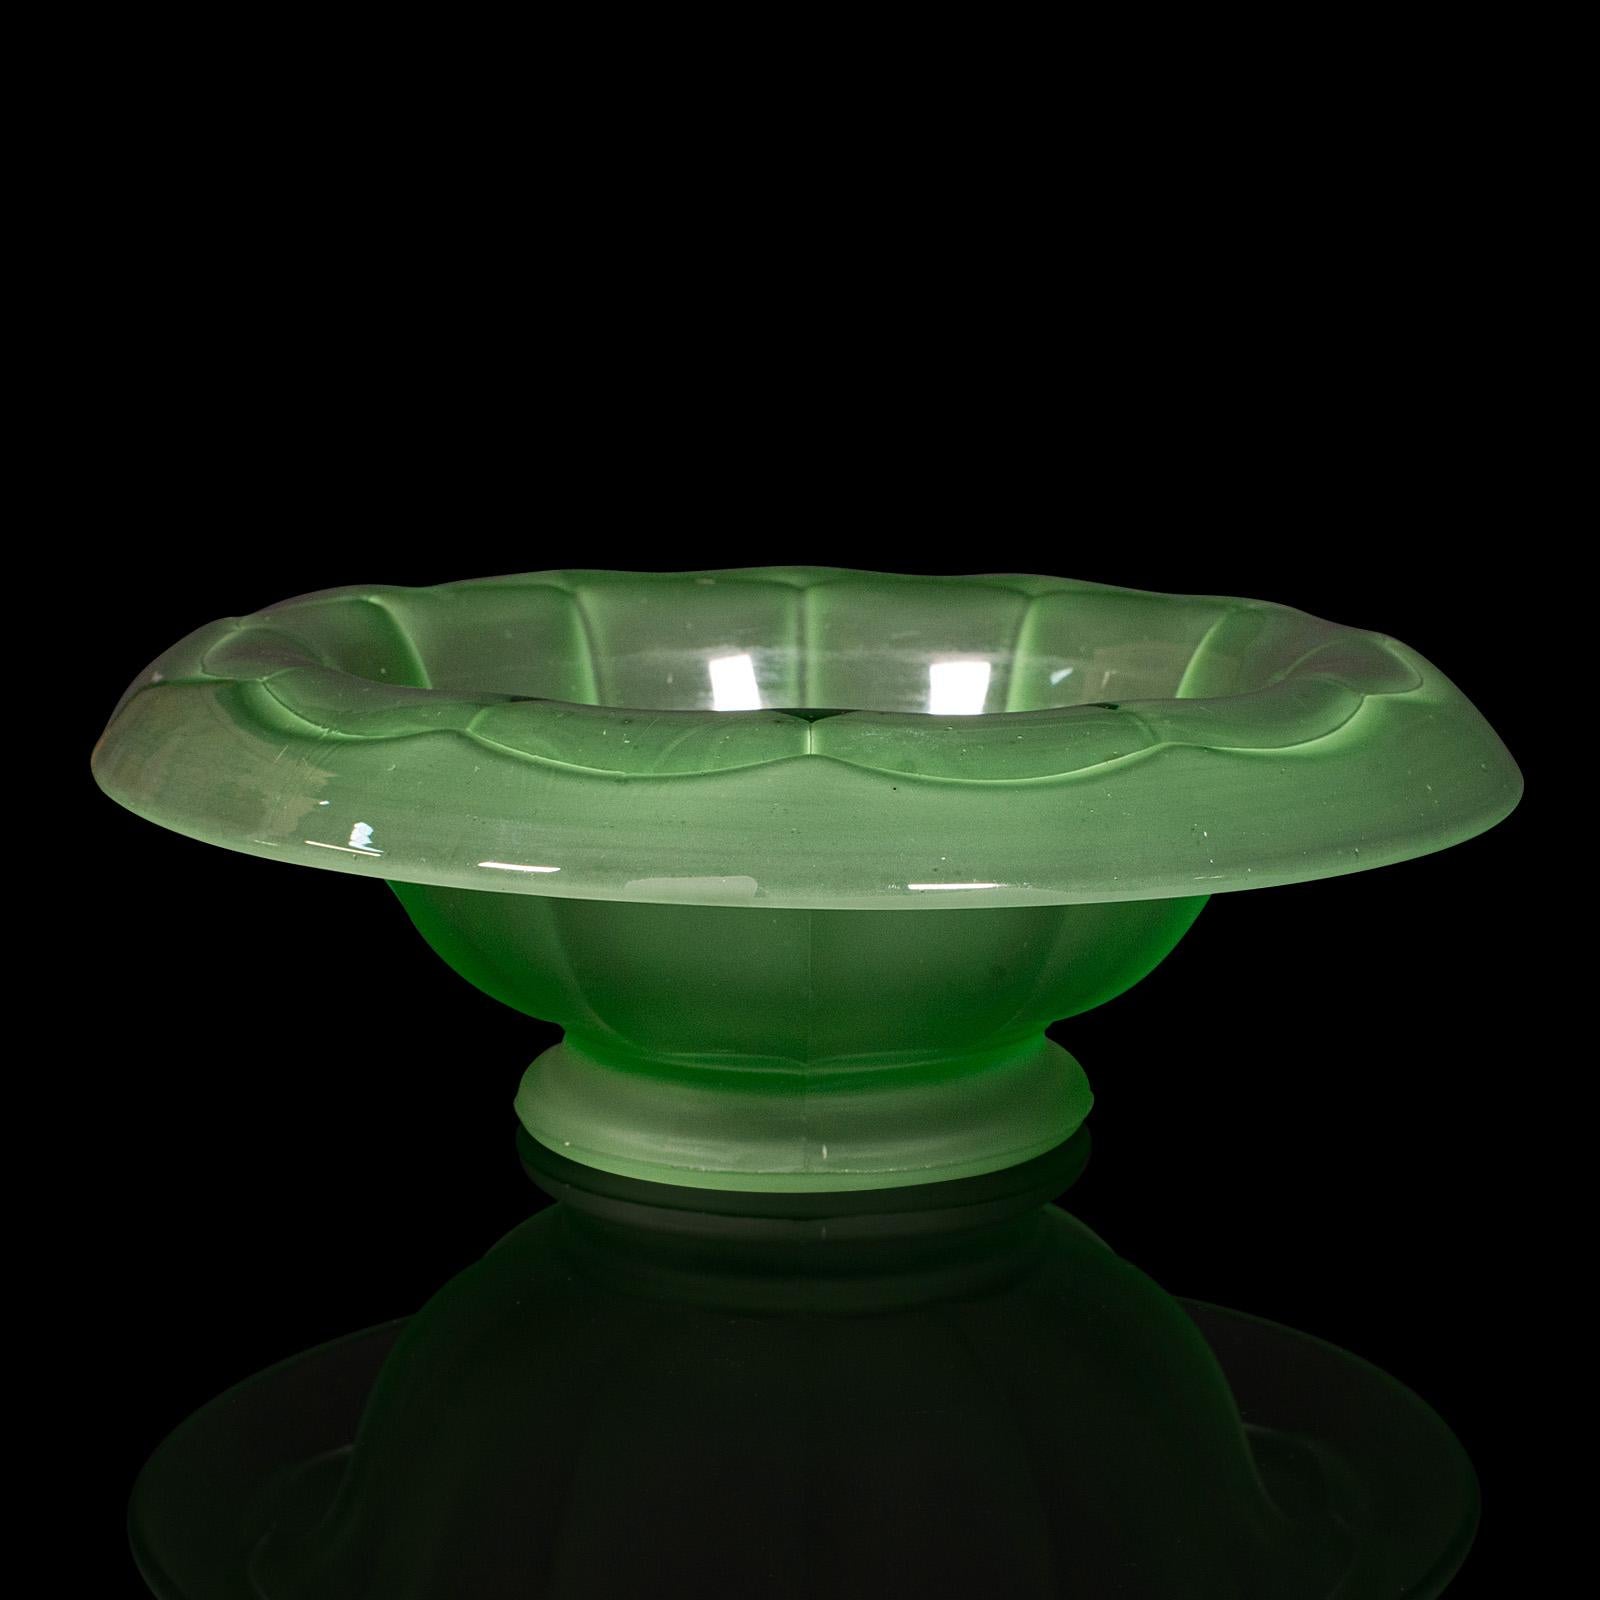 Vintage Fruit Bowl, English, Glass, Decorative Serving Dish, Art Deco, C.1930 In Good Condition For Sale In Hele, Devon, GB